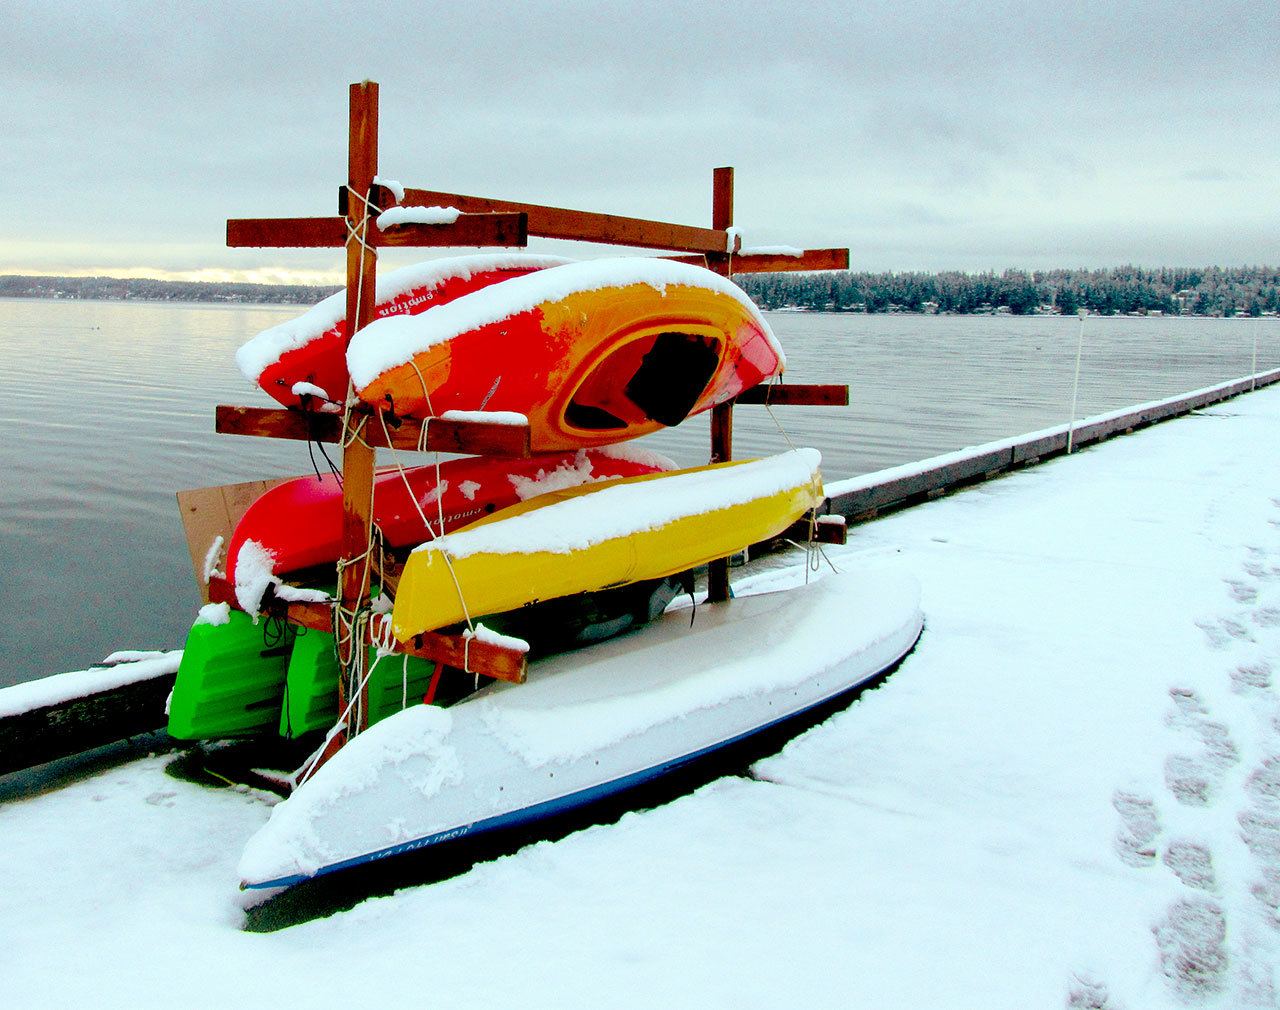 “Kayaks in the snow at Brownsville Marina,” by Terryl Asla